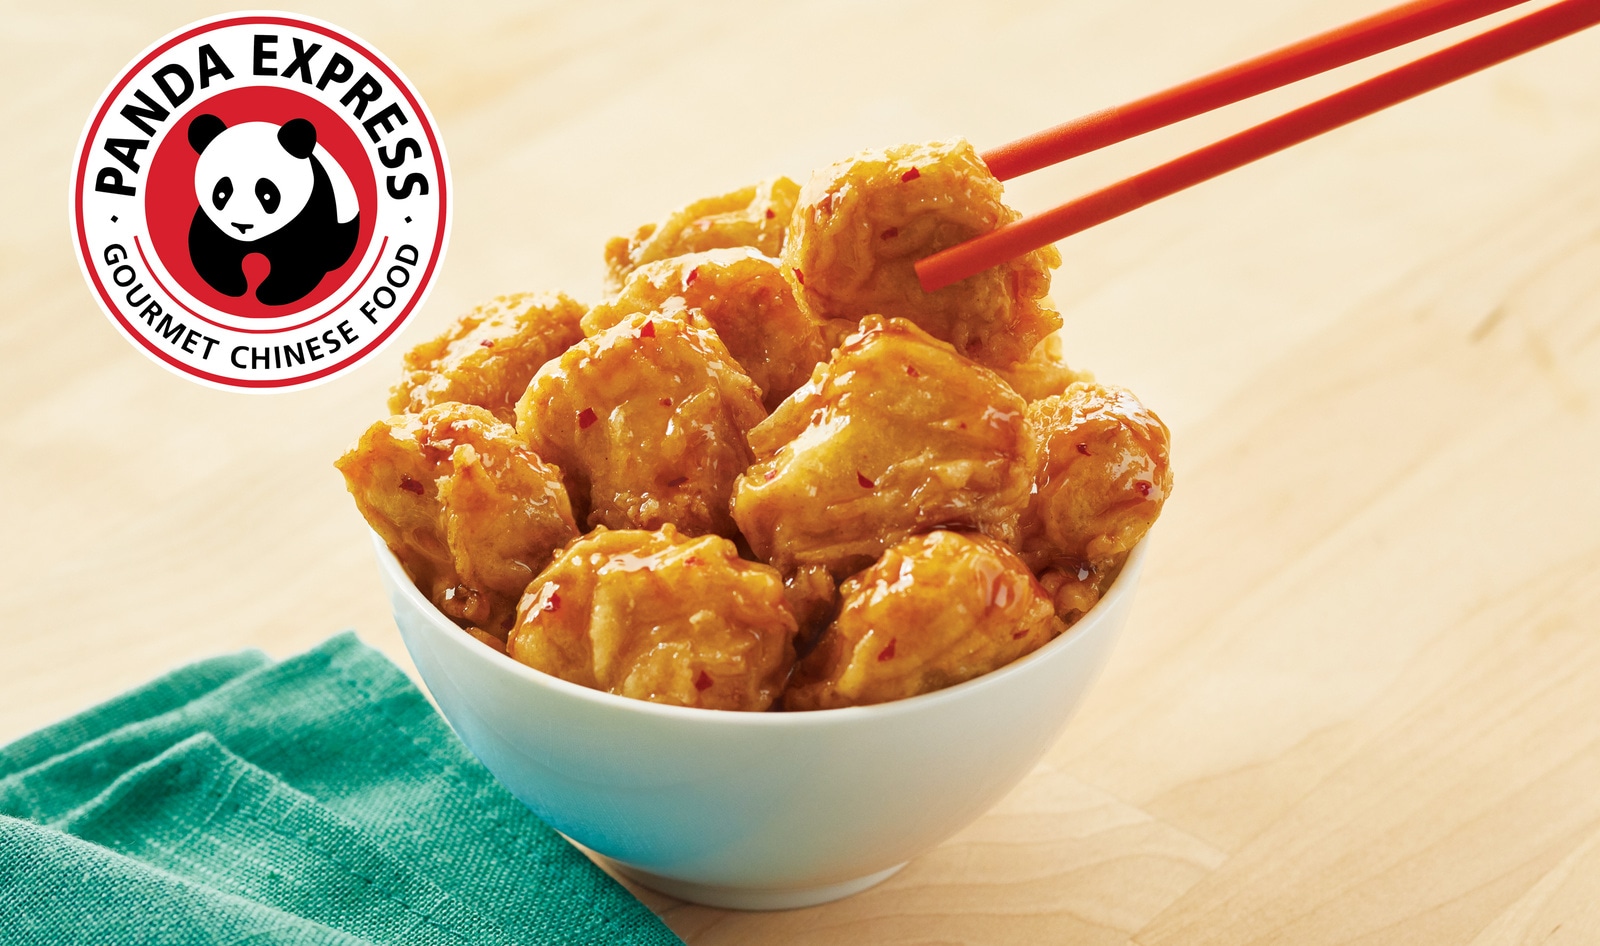 Panda Express Launches Its First Vegan Orange Chicken with Beyond Meat